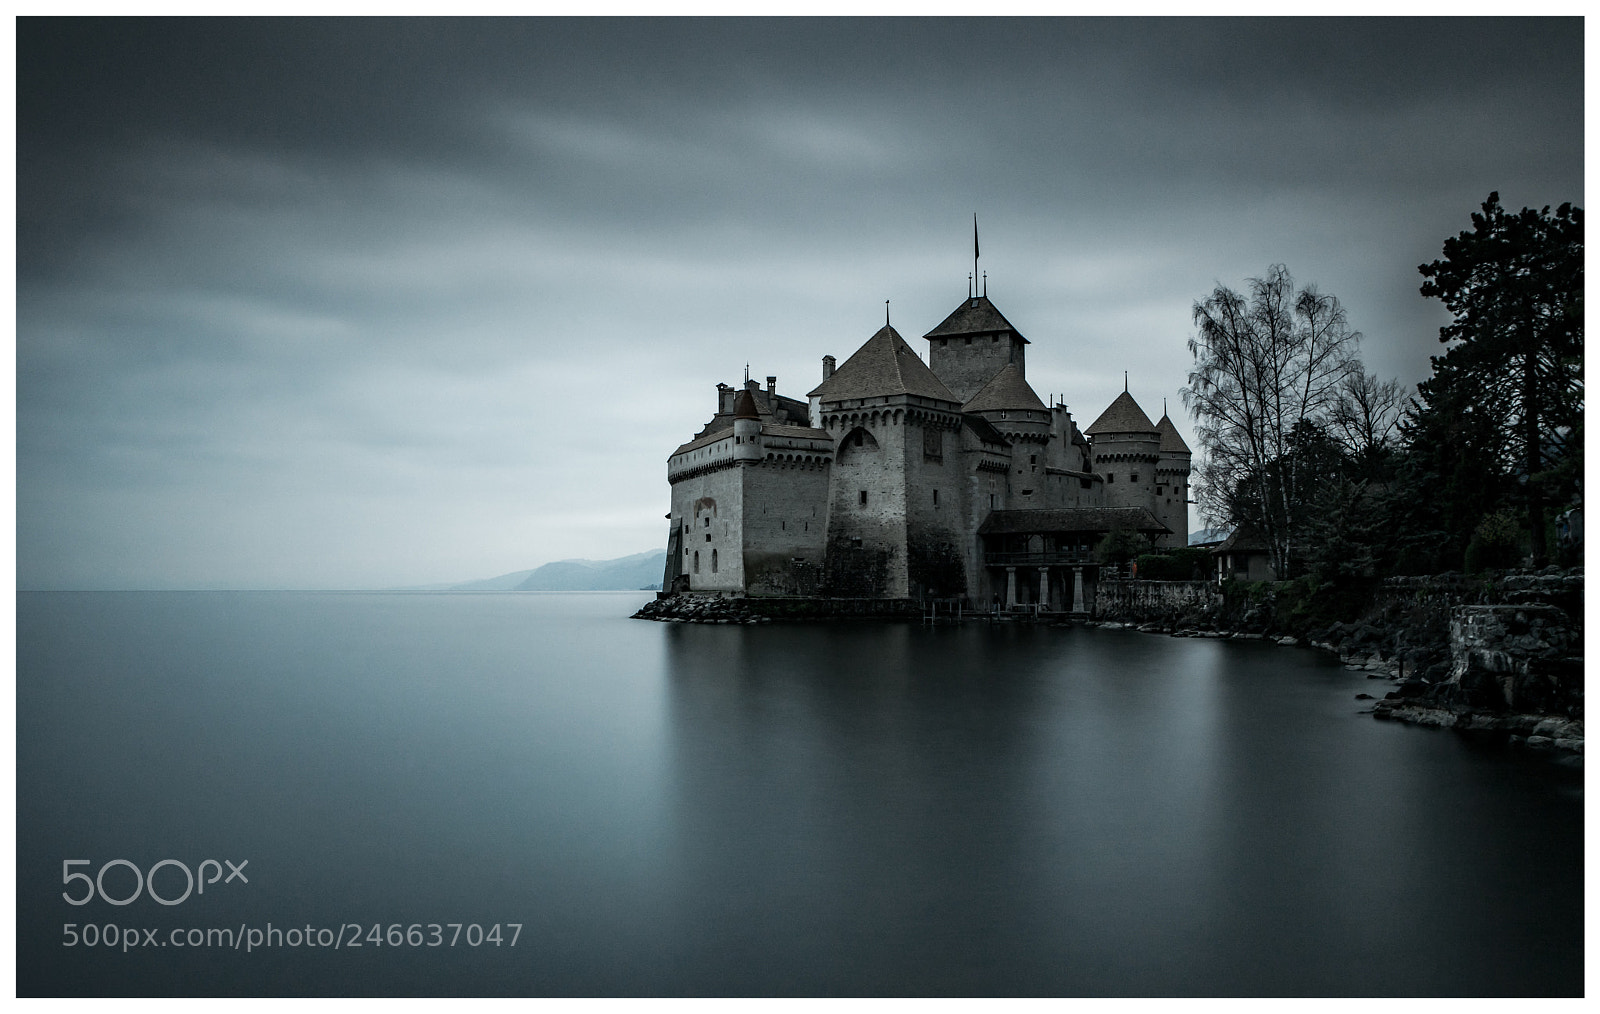 Sony a7 II sample photo. A moody looking chateau photography